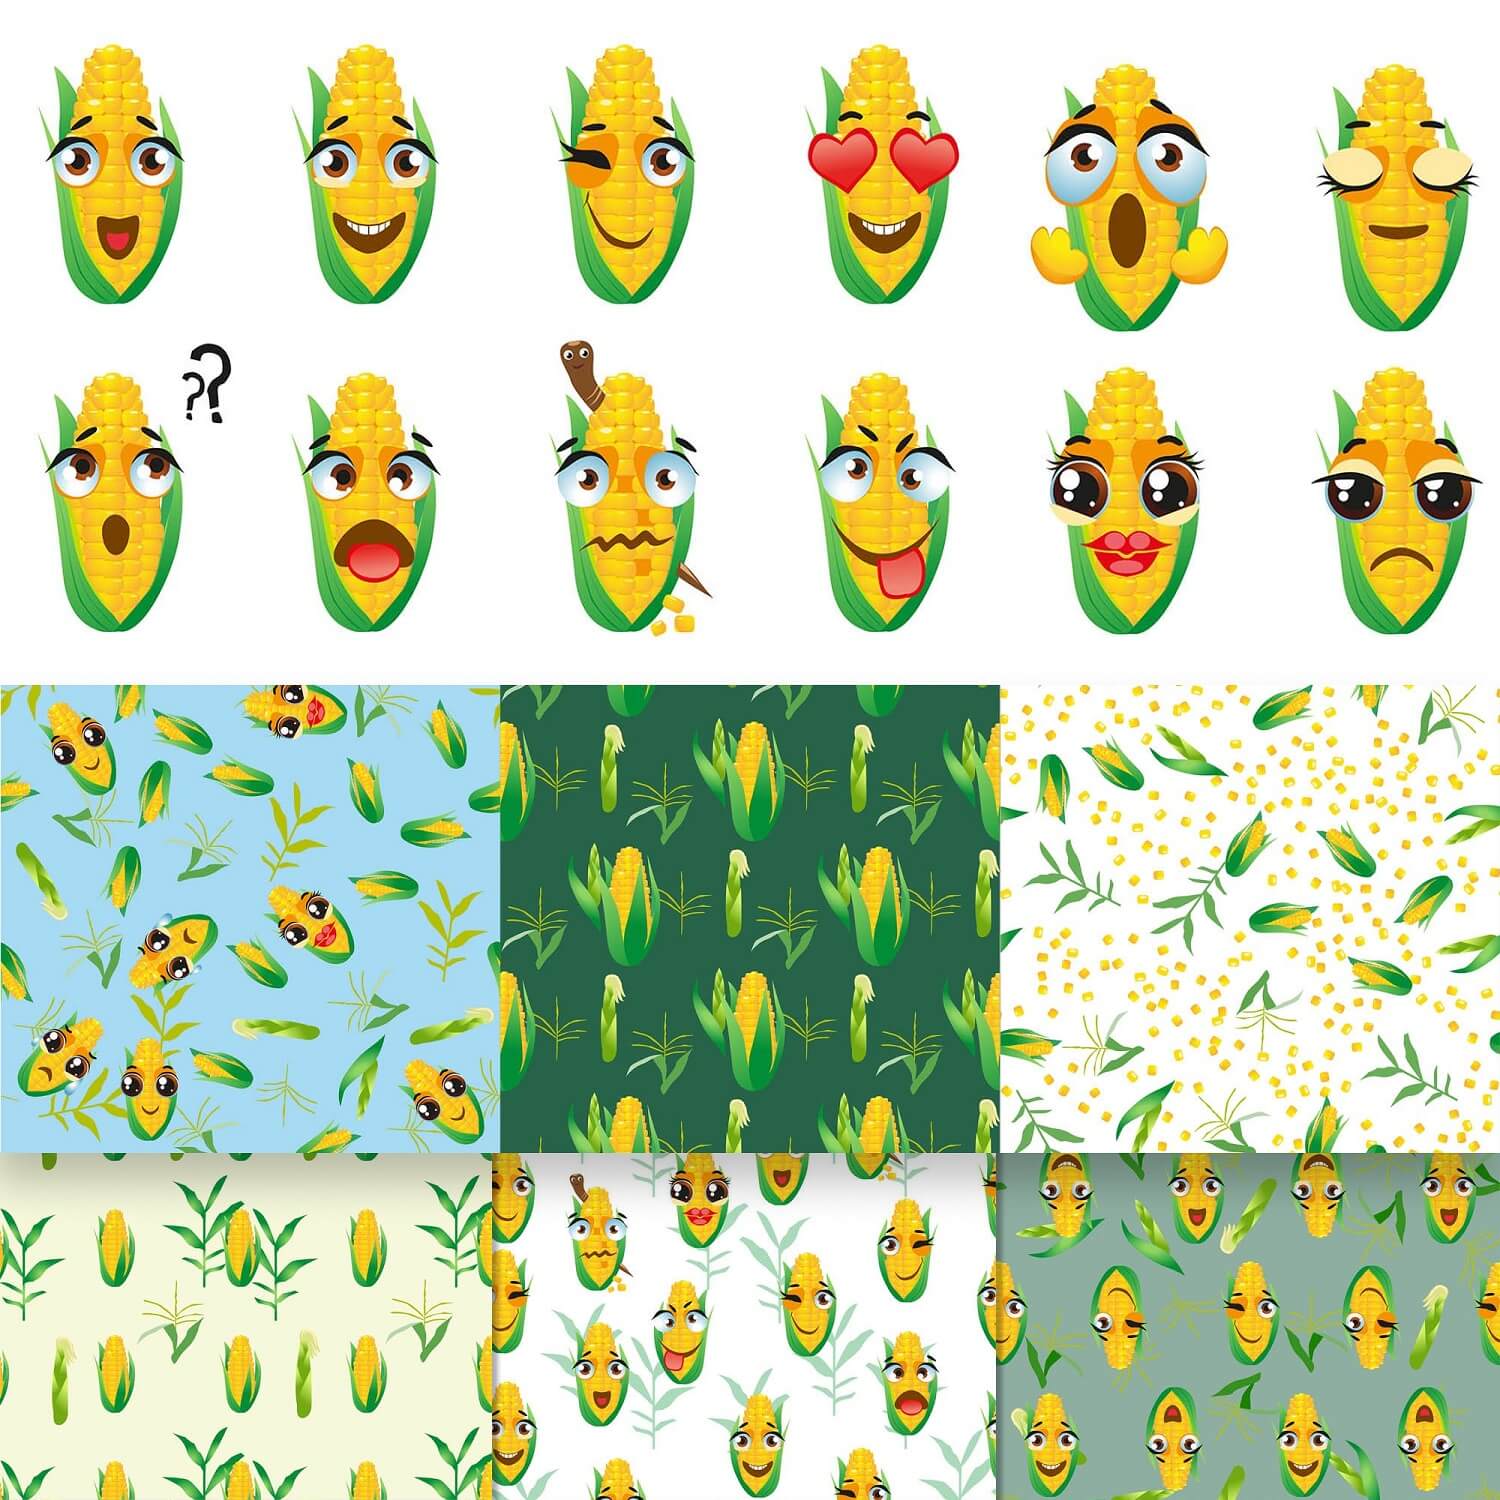 Ears of corn are drawn with eyes and a mouth.